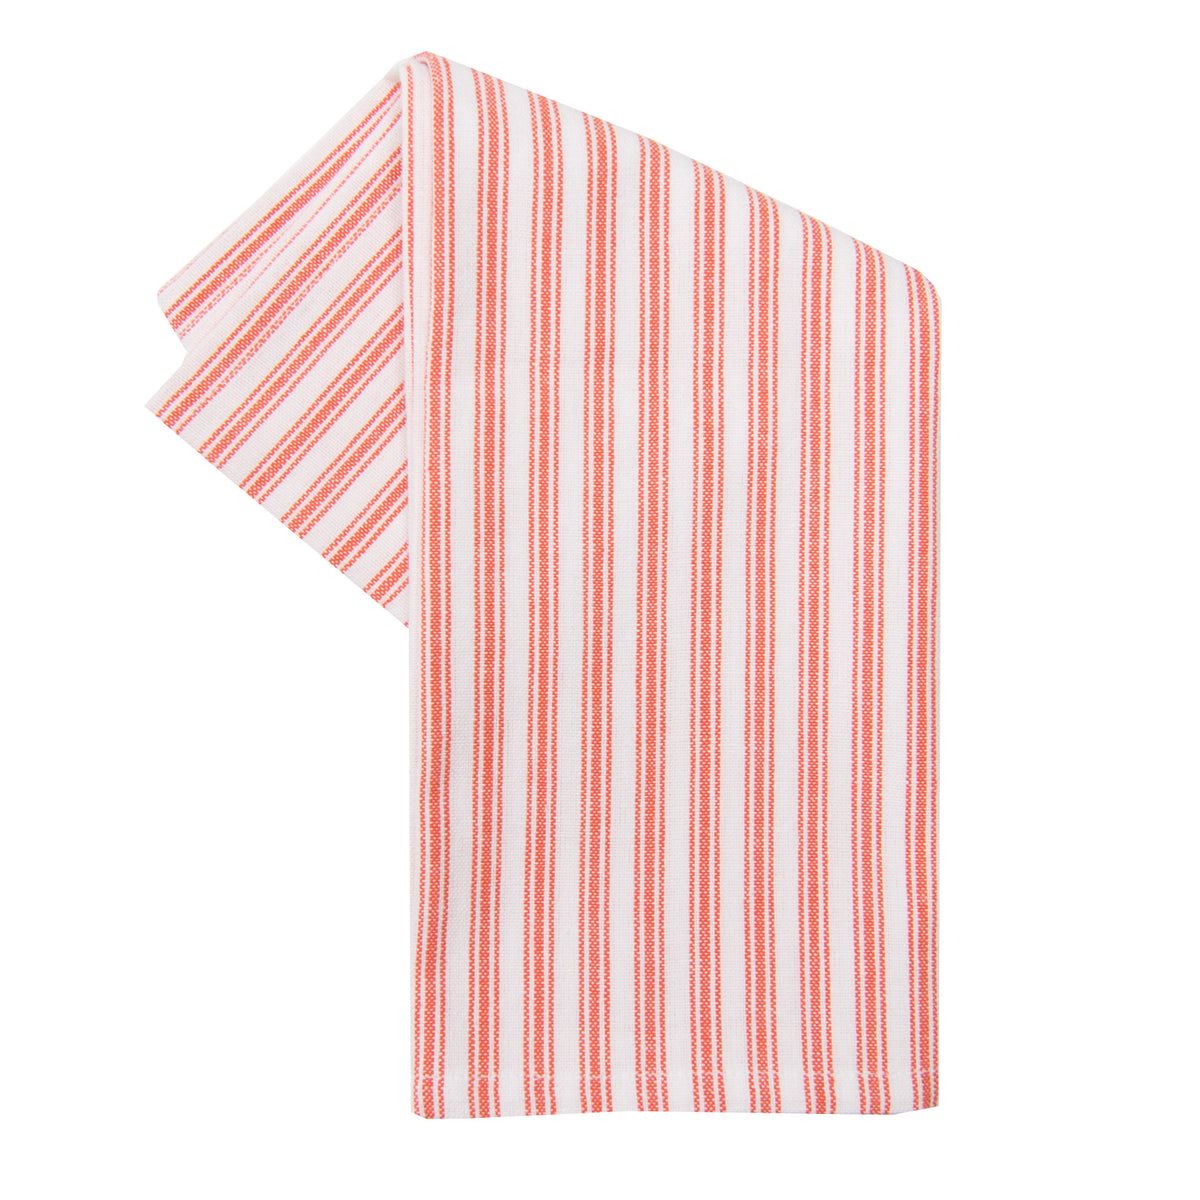 Dunroven House Red - White Plain Weave Striped Towel 20x28